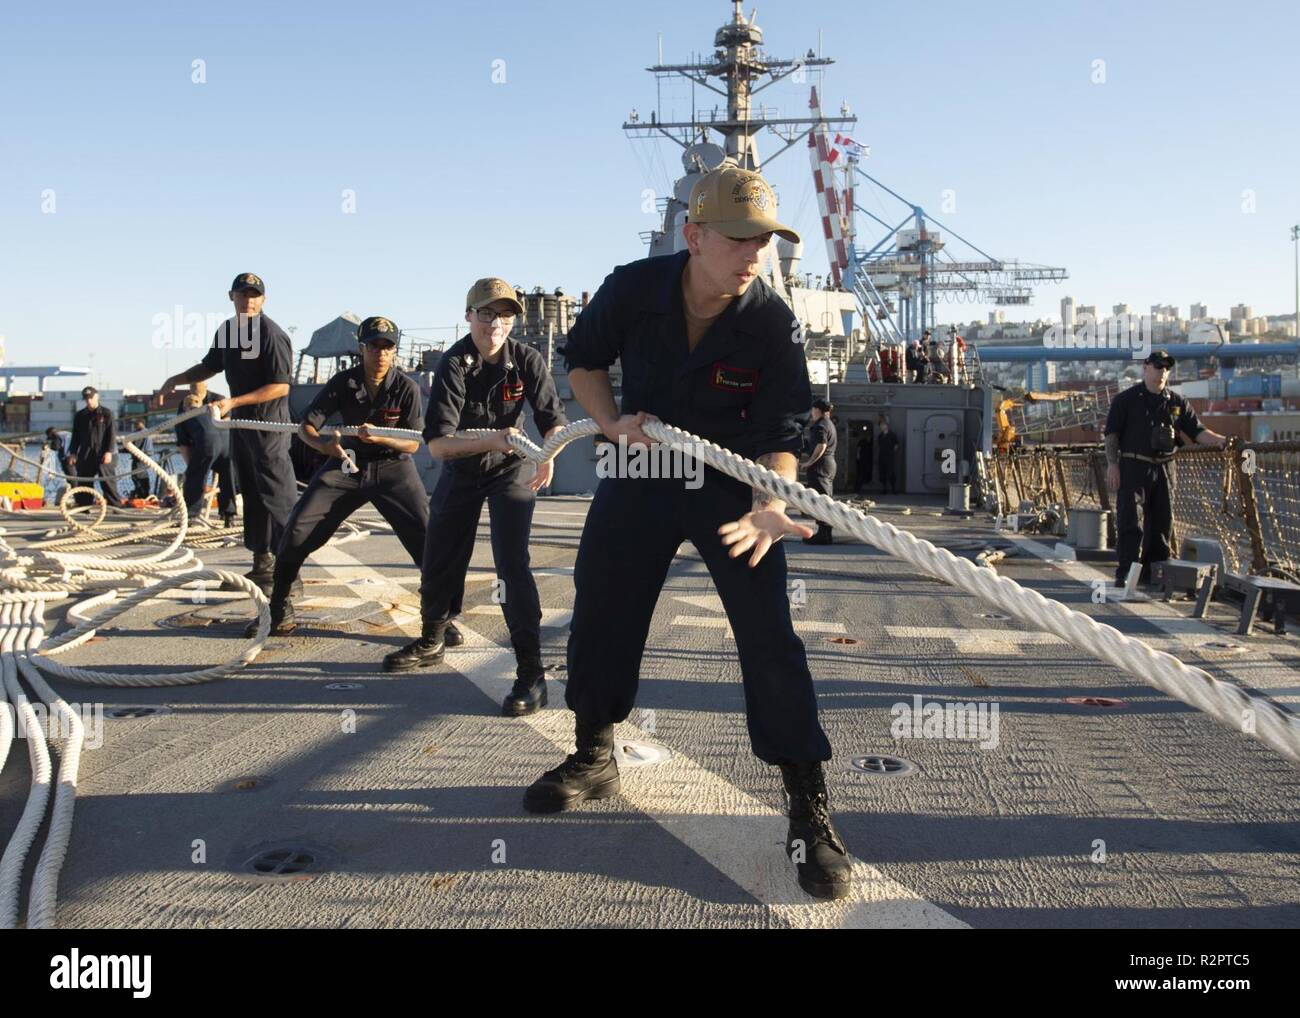 HAIFA, Israel (Oct. 28, 2018) Sailors heave a mooring line aboard the Arleigh Burke-class guided-missile destroyer USS Arleigh Burke (DDG 51) as the ship departs Haifa, Israel, following a scheduled port visit Oct. 28, 2018. Arleigh Burke, homeported at Naval Station Norfolk, is conducting naval operations in the U.S. 6th Fleet area of operations in support of U.S. national security interests in Europe and Africa. Stock Photo